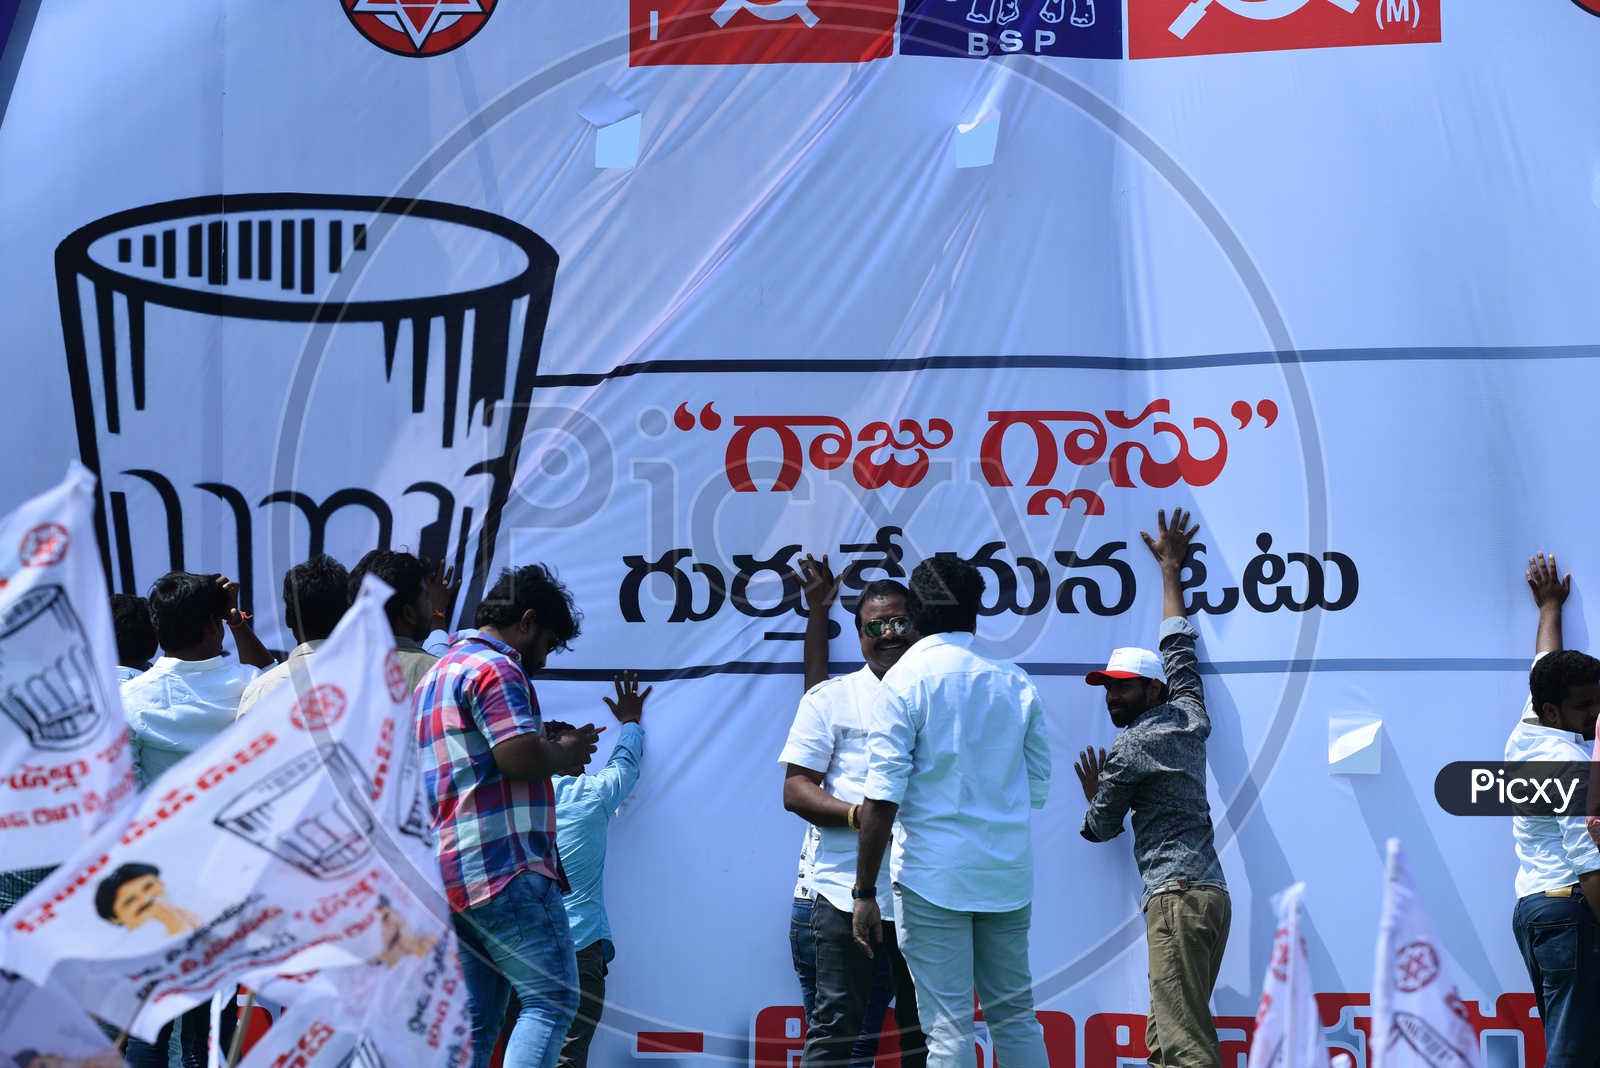 Jana sena party supporters setting up the banner at an election campaign